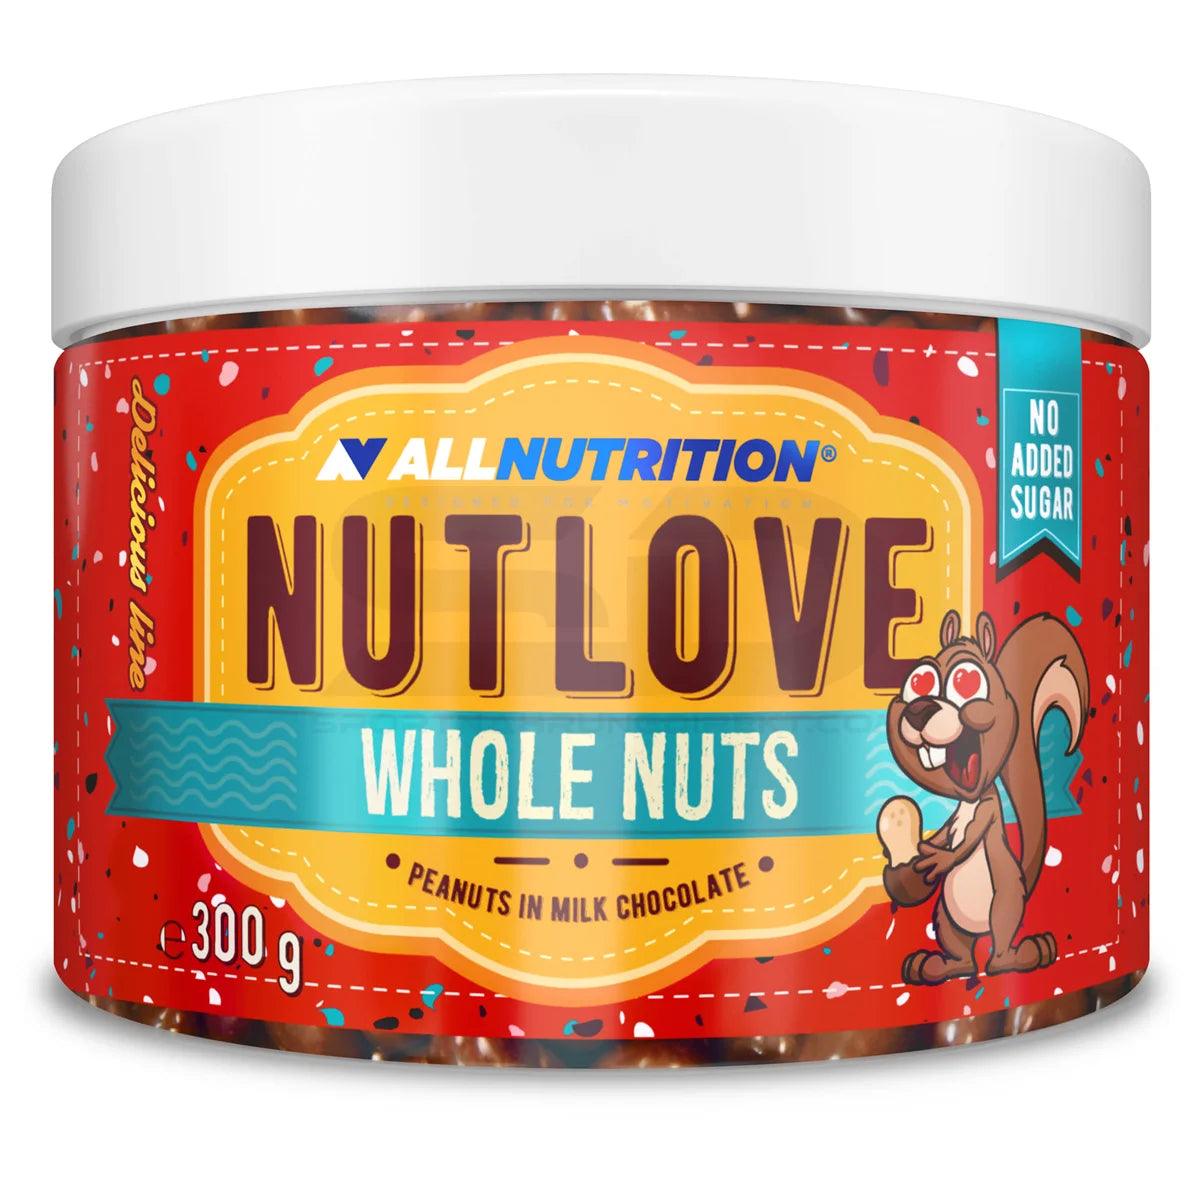 ALL NUTRITION® WHOLE NUTS 300g PEANUTS - Supplement Support